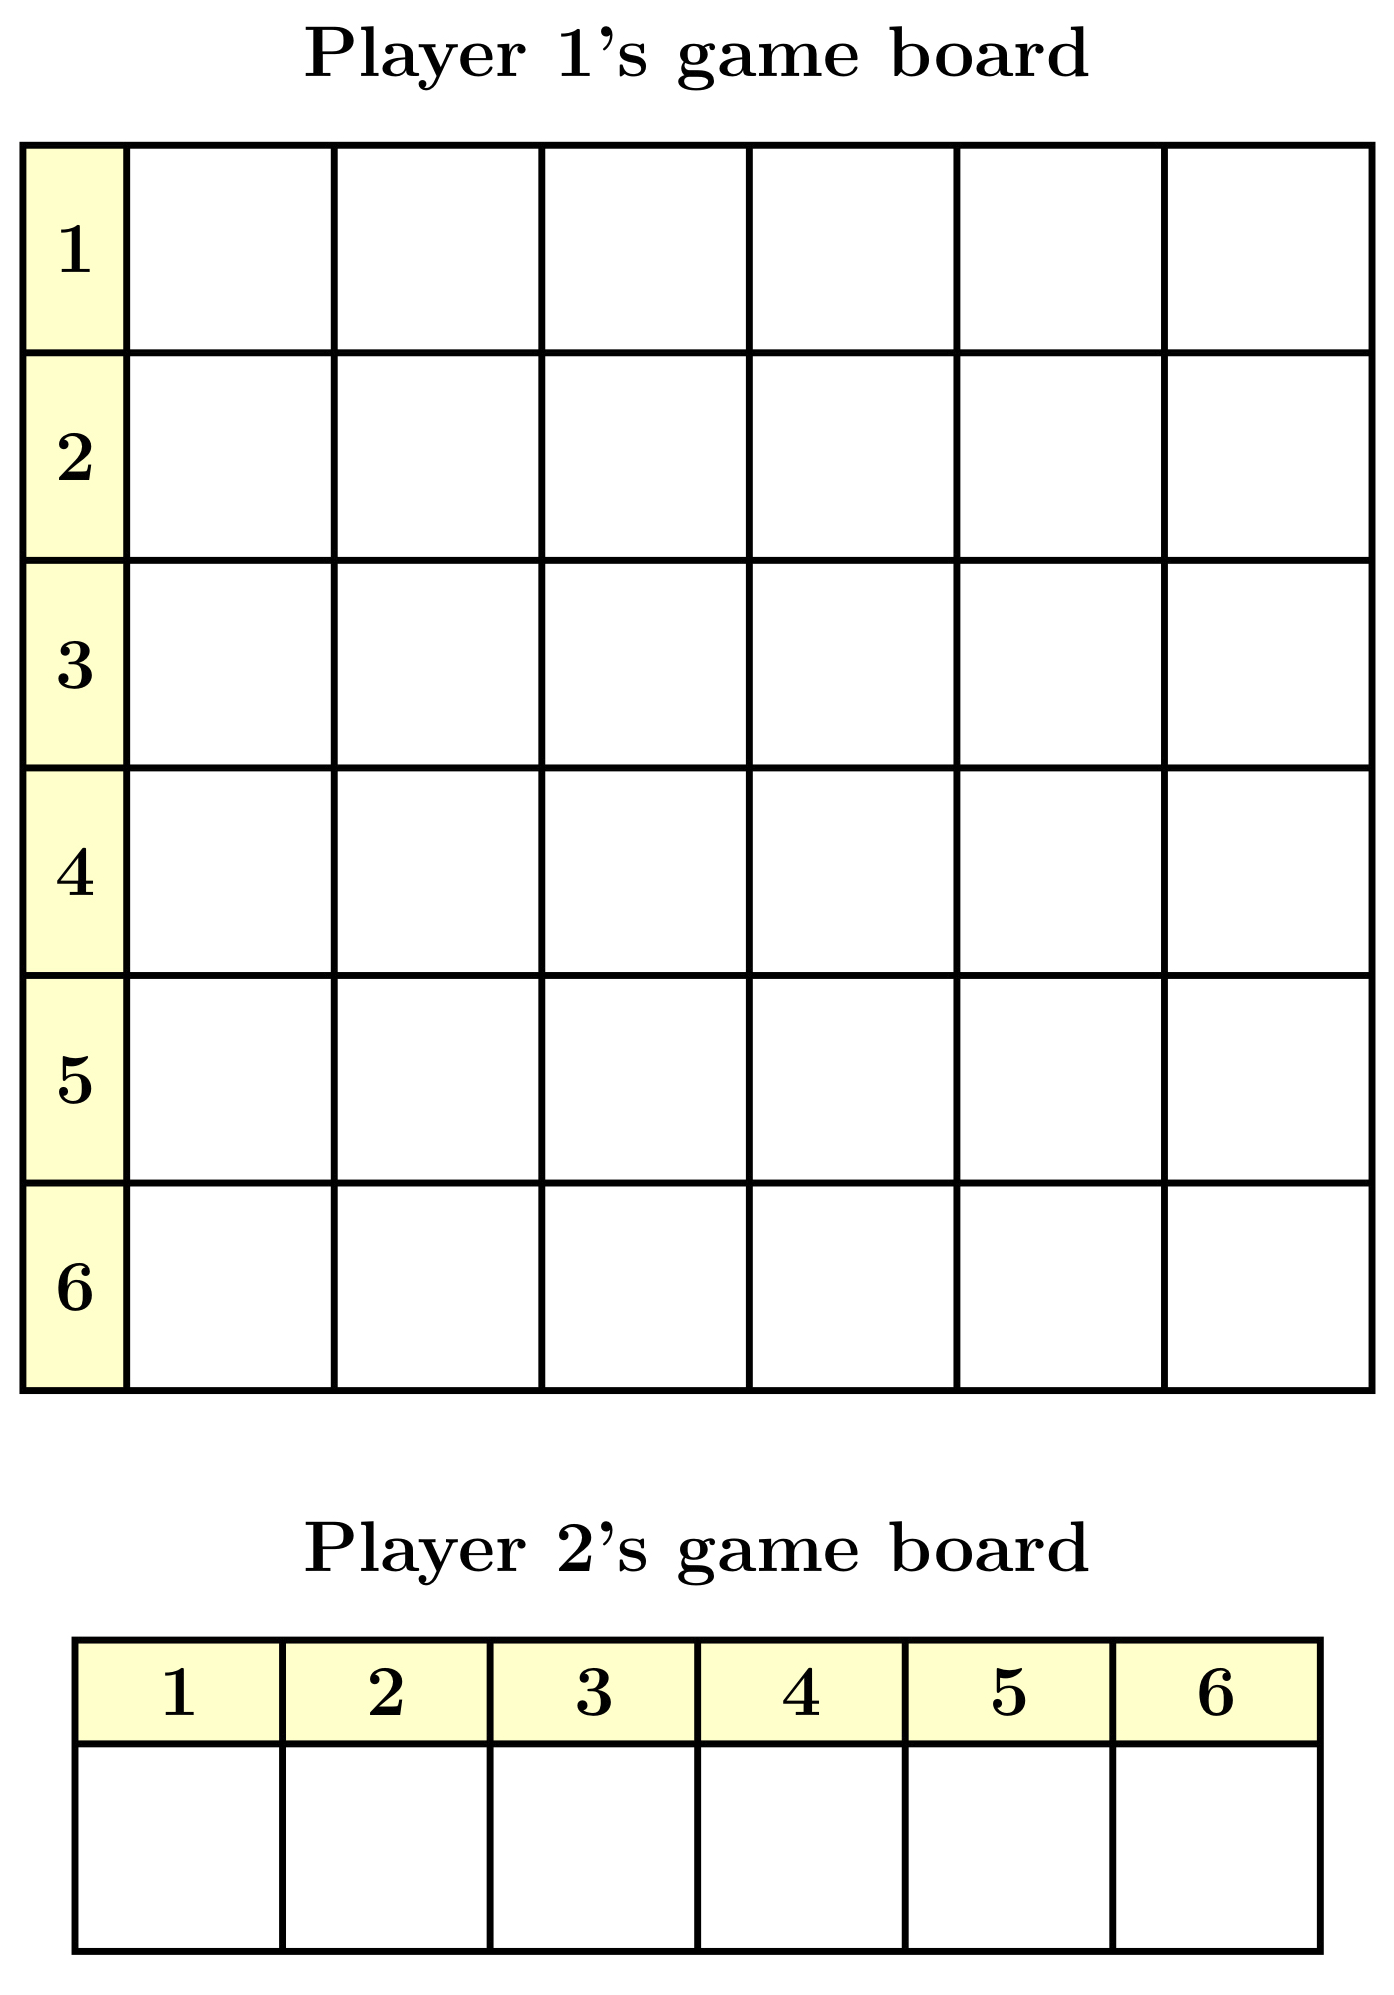 6 by 6 game board for player 1, with each row numbered 1 through 6. 1 by 6 game board for player 2, with each box numbered 1 through 6.